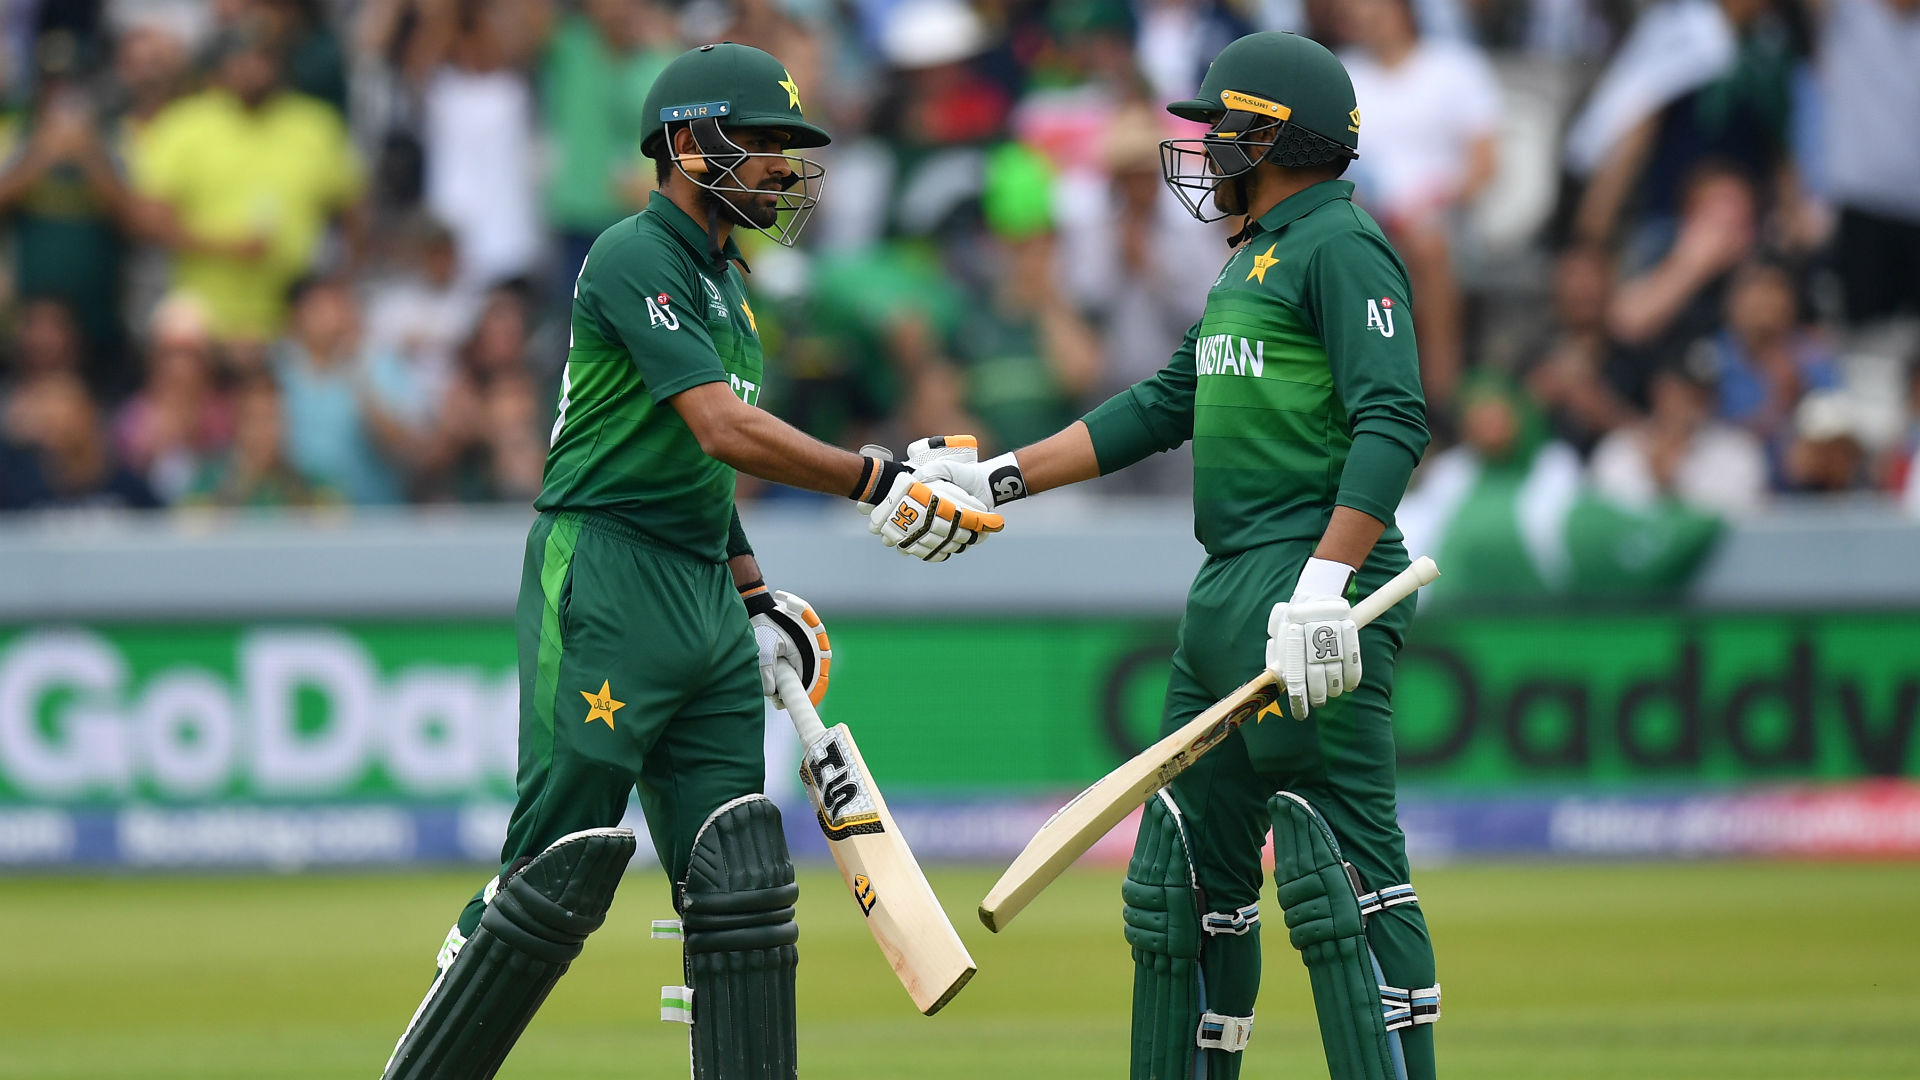 Babar Azam made a brilliant hundred under pressure and Haris Sohail stepped up again as Pakistan defeated New Zealand at the World Cup.